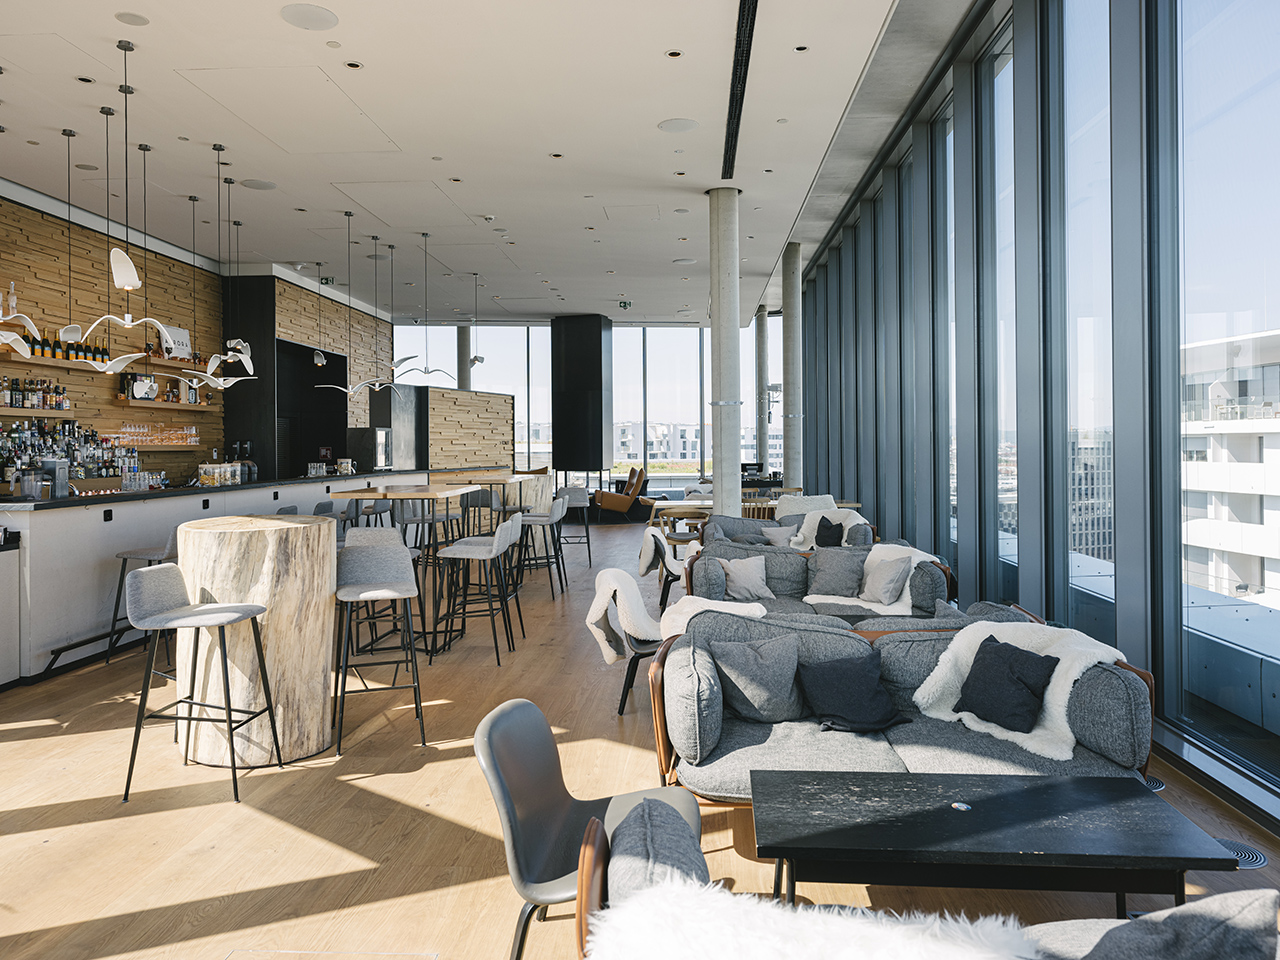 Aurora rooftop bar interior design hotel andaz by archisphere an interior architecture studio in vienna photo copyright by christof wagner